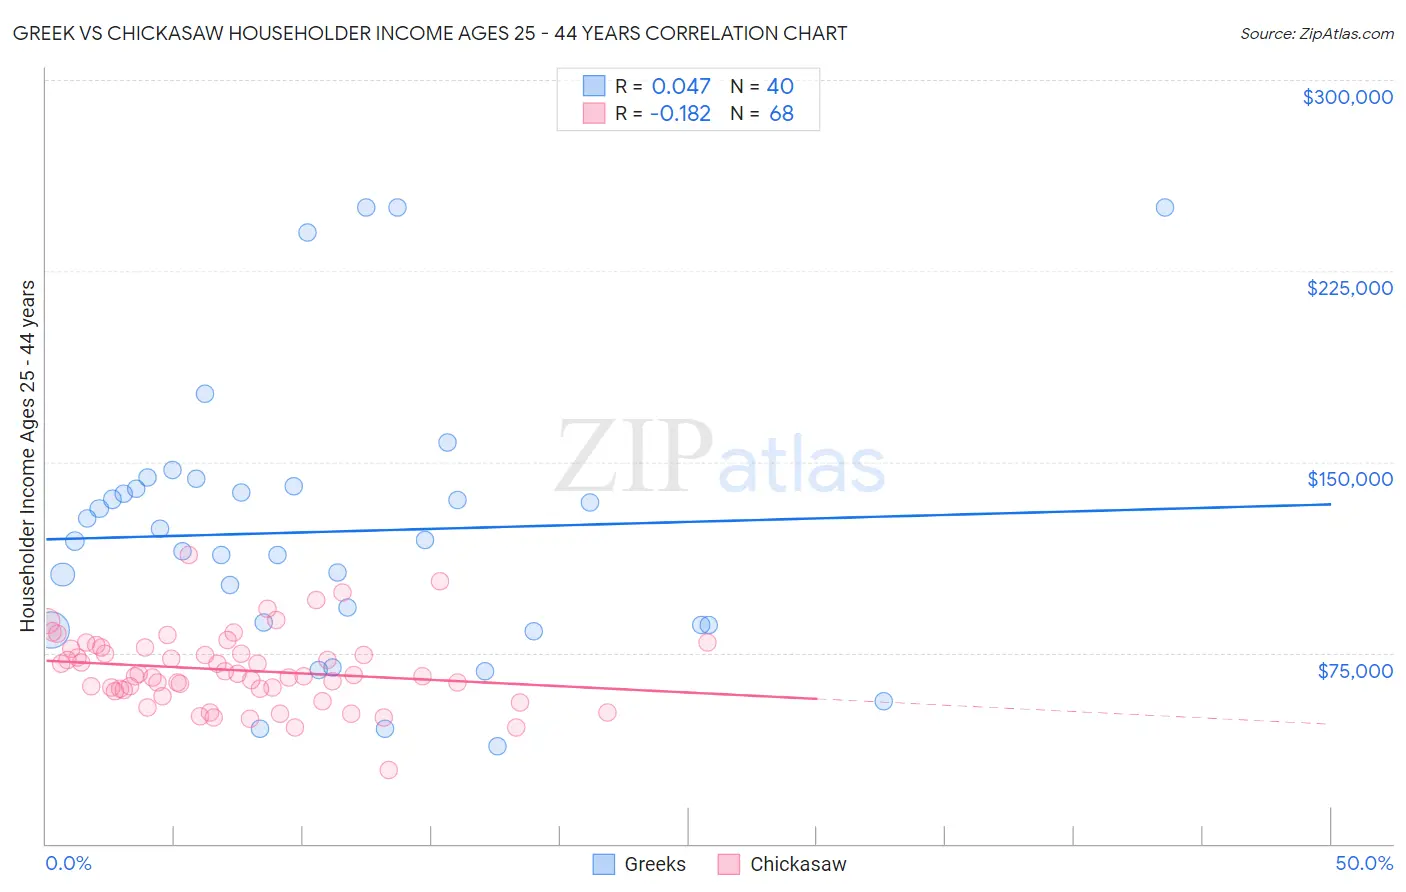 Greek vs Chickasaw Householder Income Ages 25 - 44 years